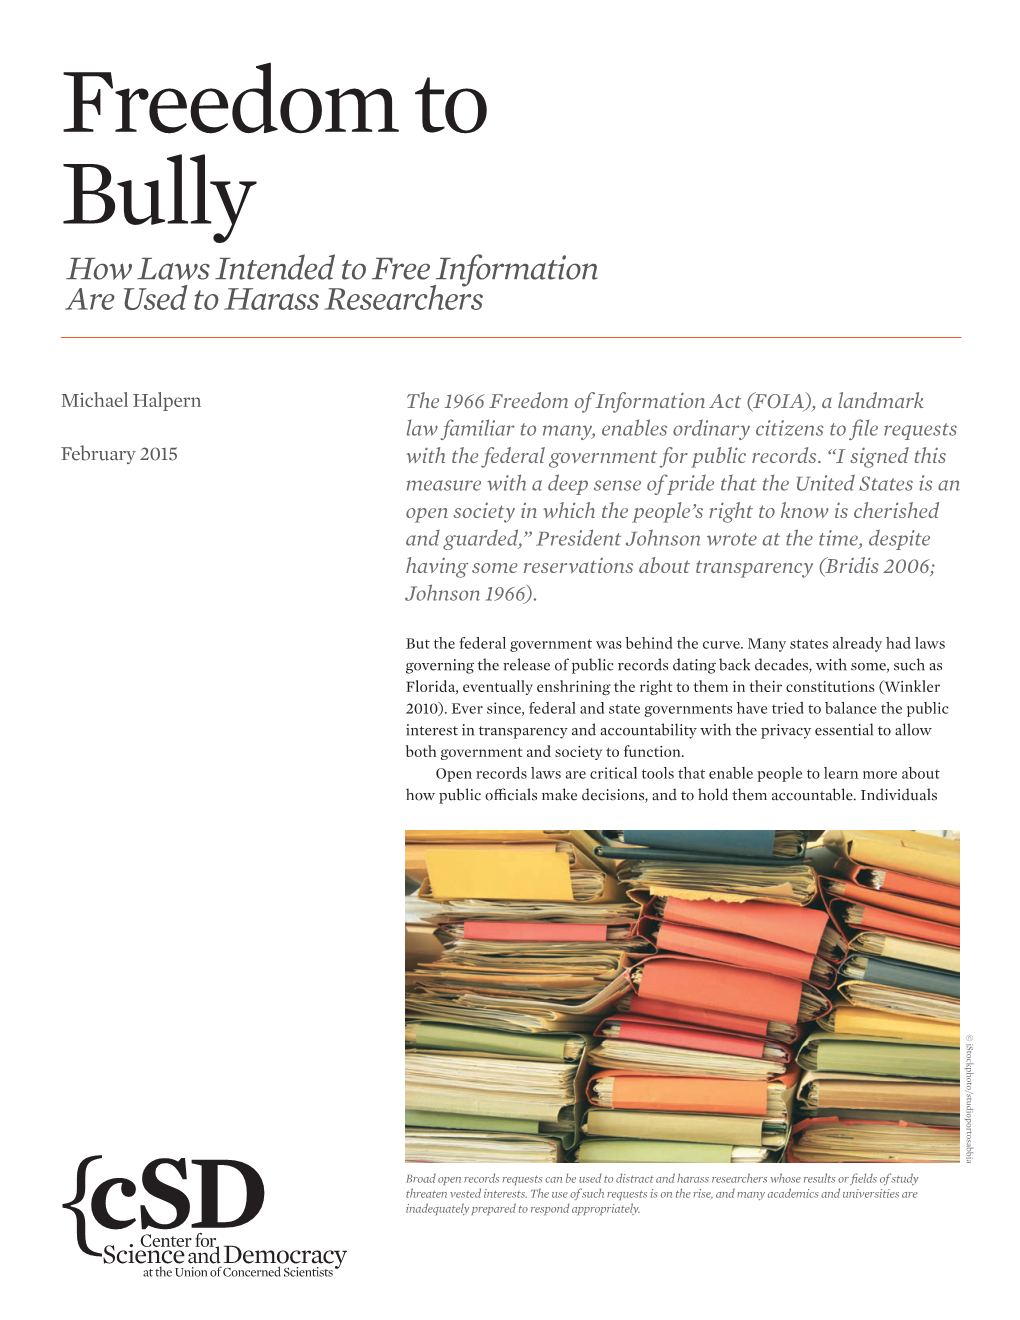 Freedom to Bully How Laws Intended to Free Information Are Used to Harass Researchers